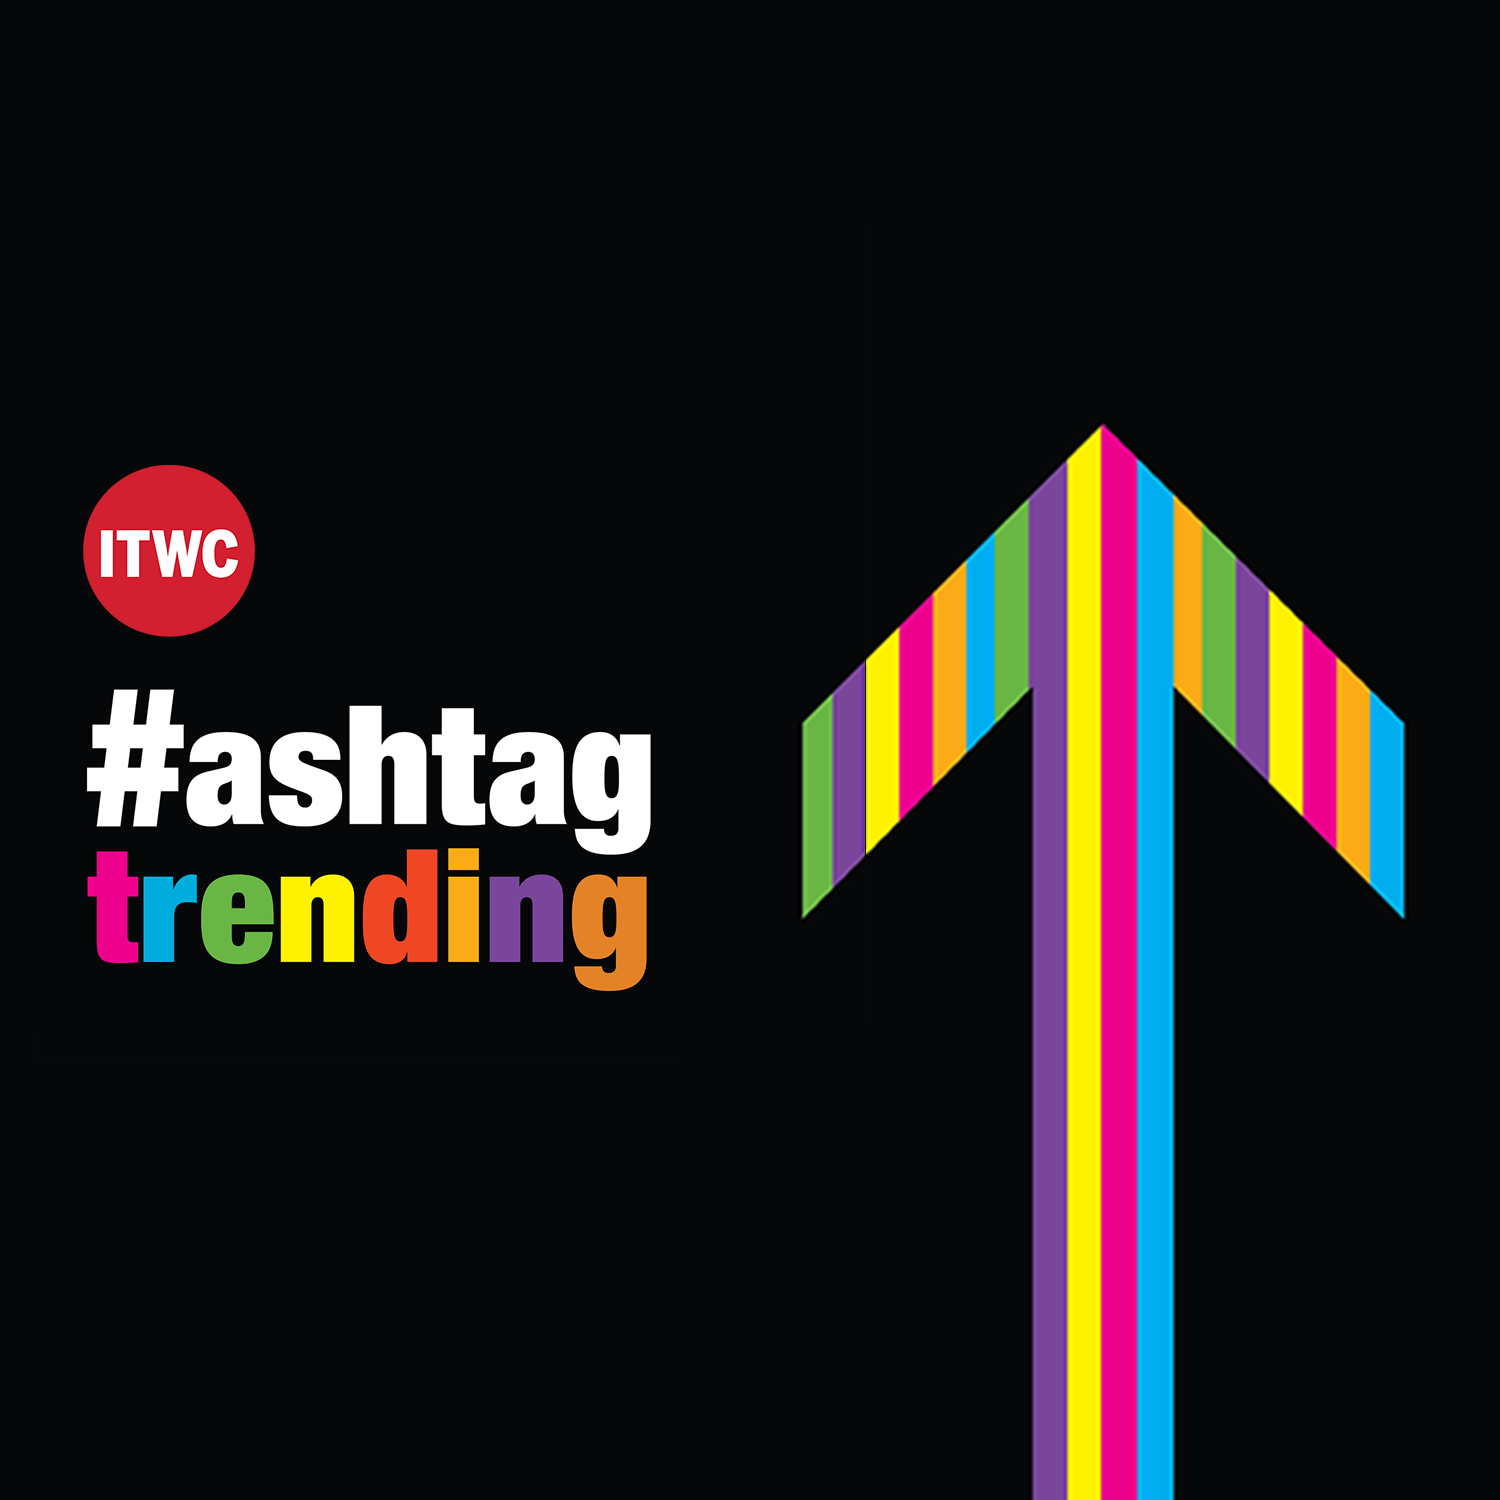 Hashtag Trending, May 13, 2021- Xiaomi removed from trade ban list; Amazon ‘hire-to-fire’; new …